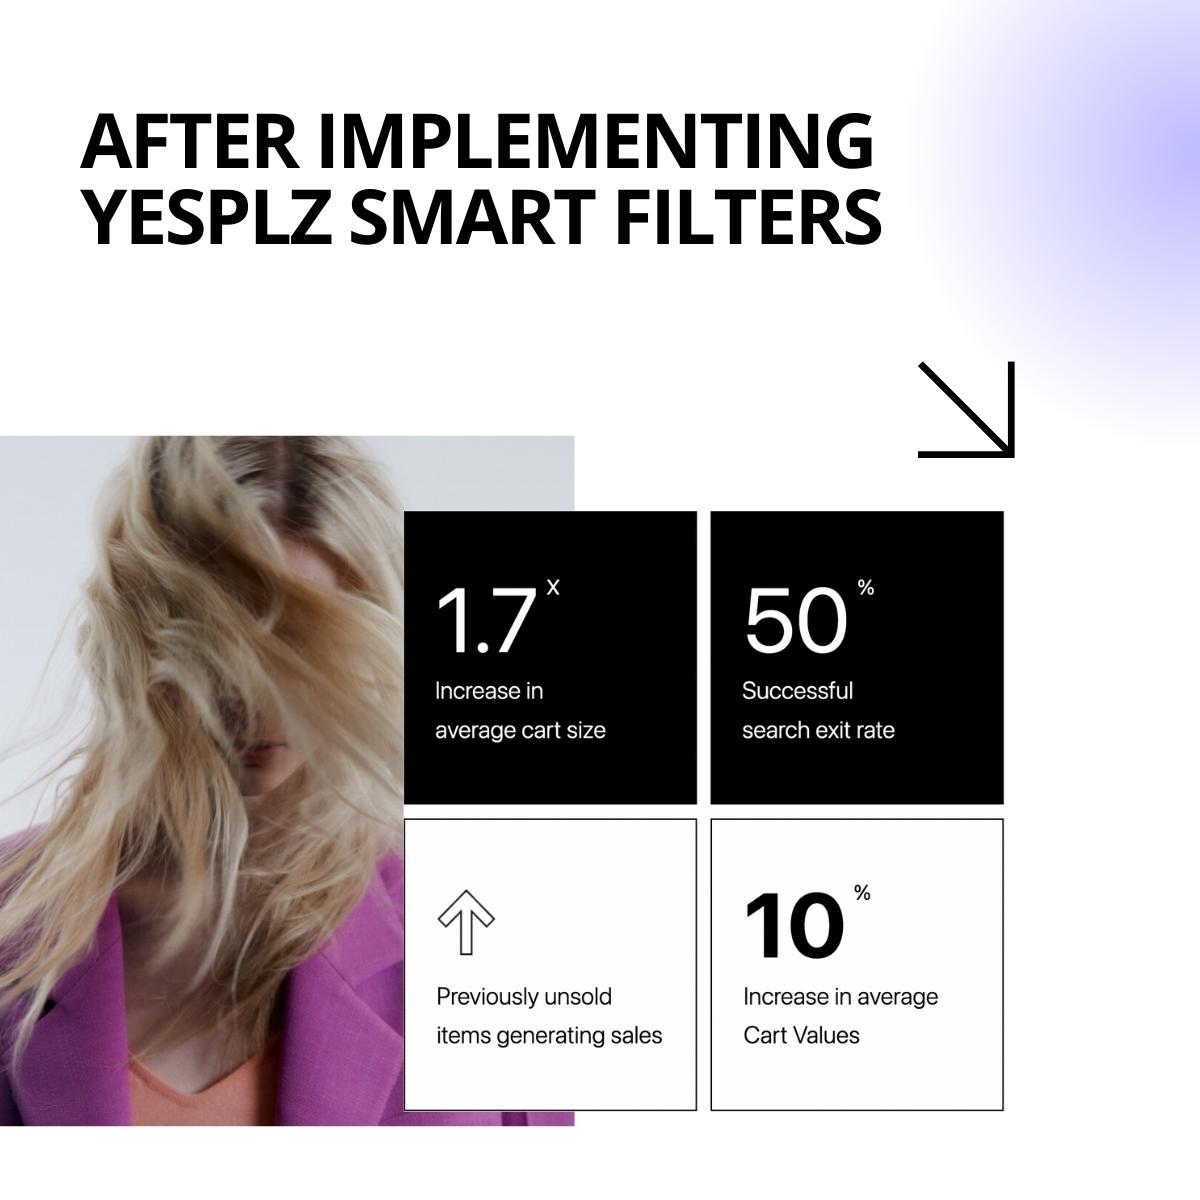 The end results of implementing YesPlz smart product filter & search